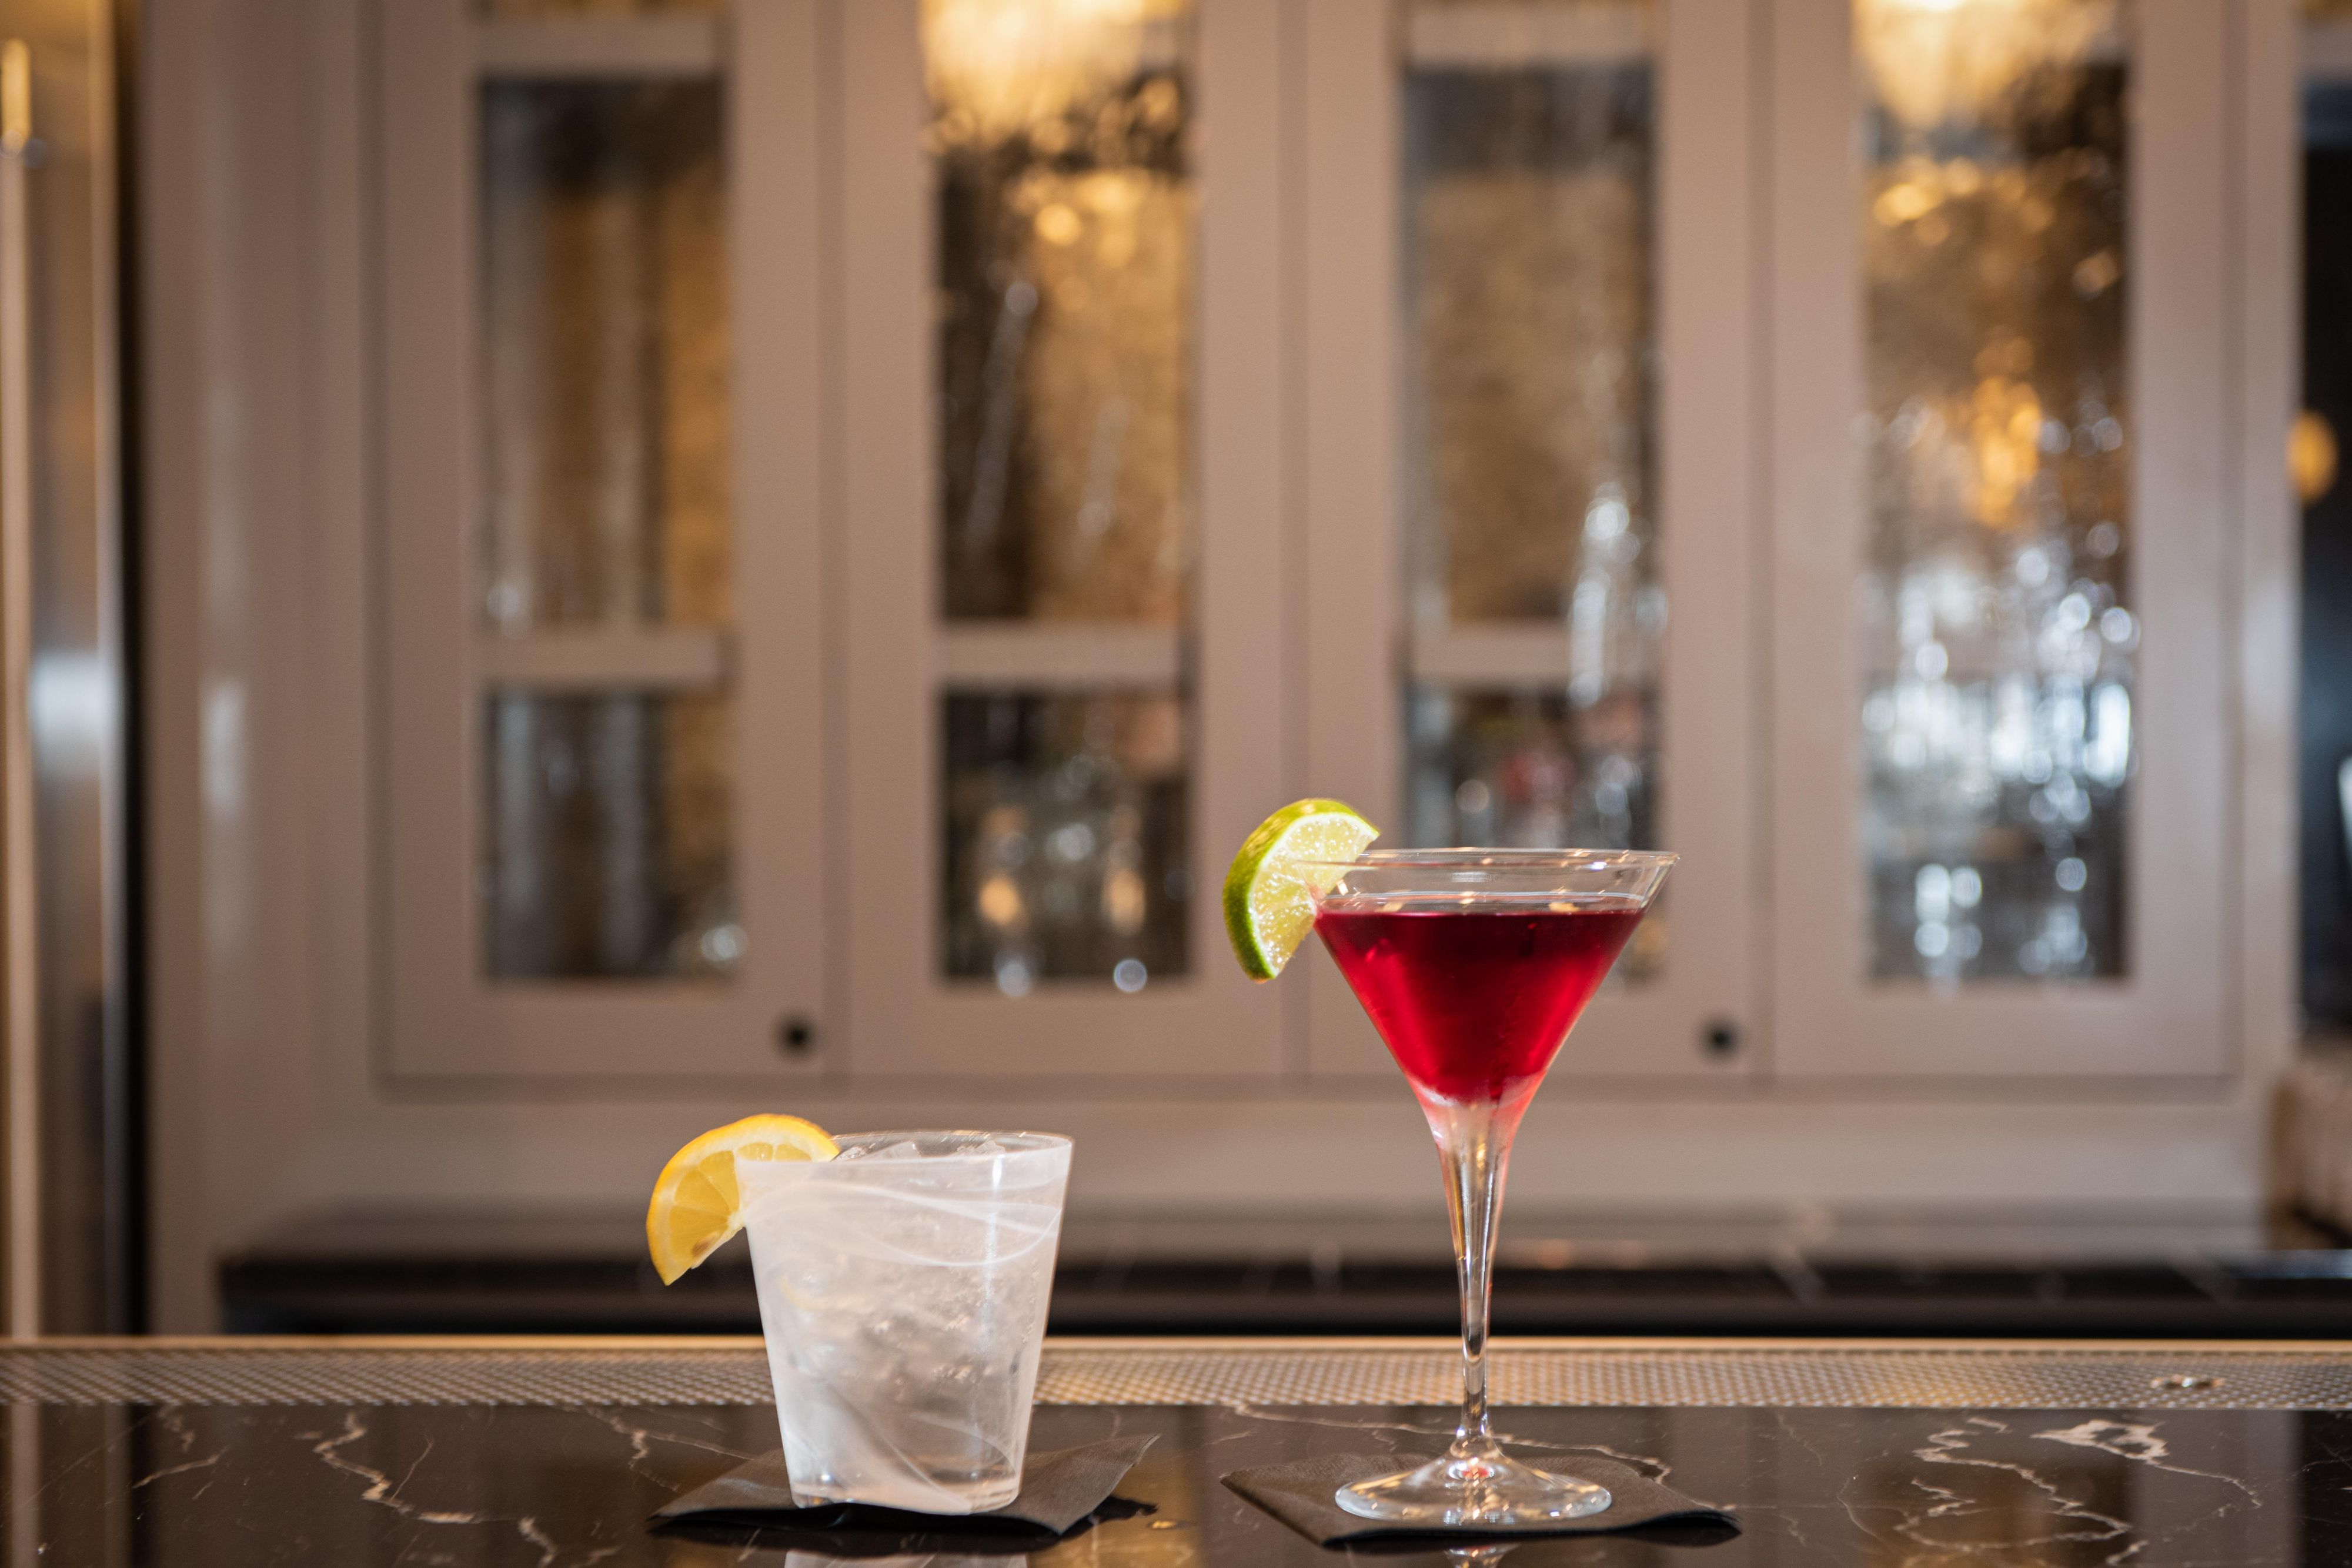 Join us for cocktails at our lobby bar in New Orleans.